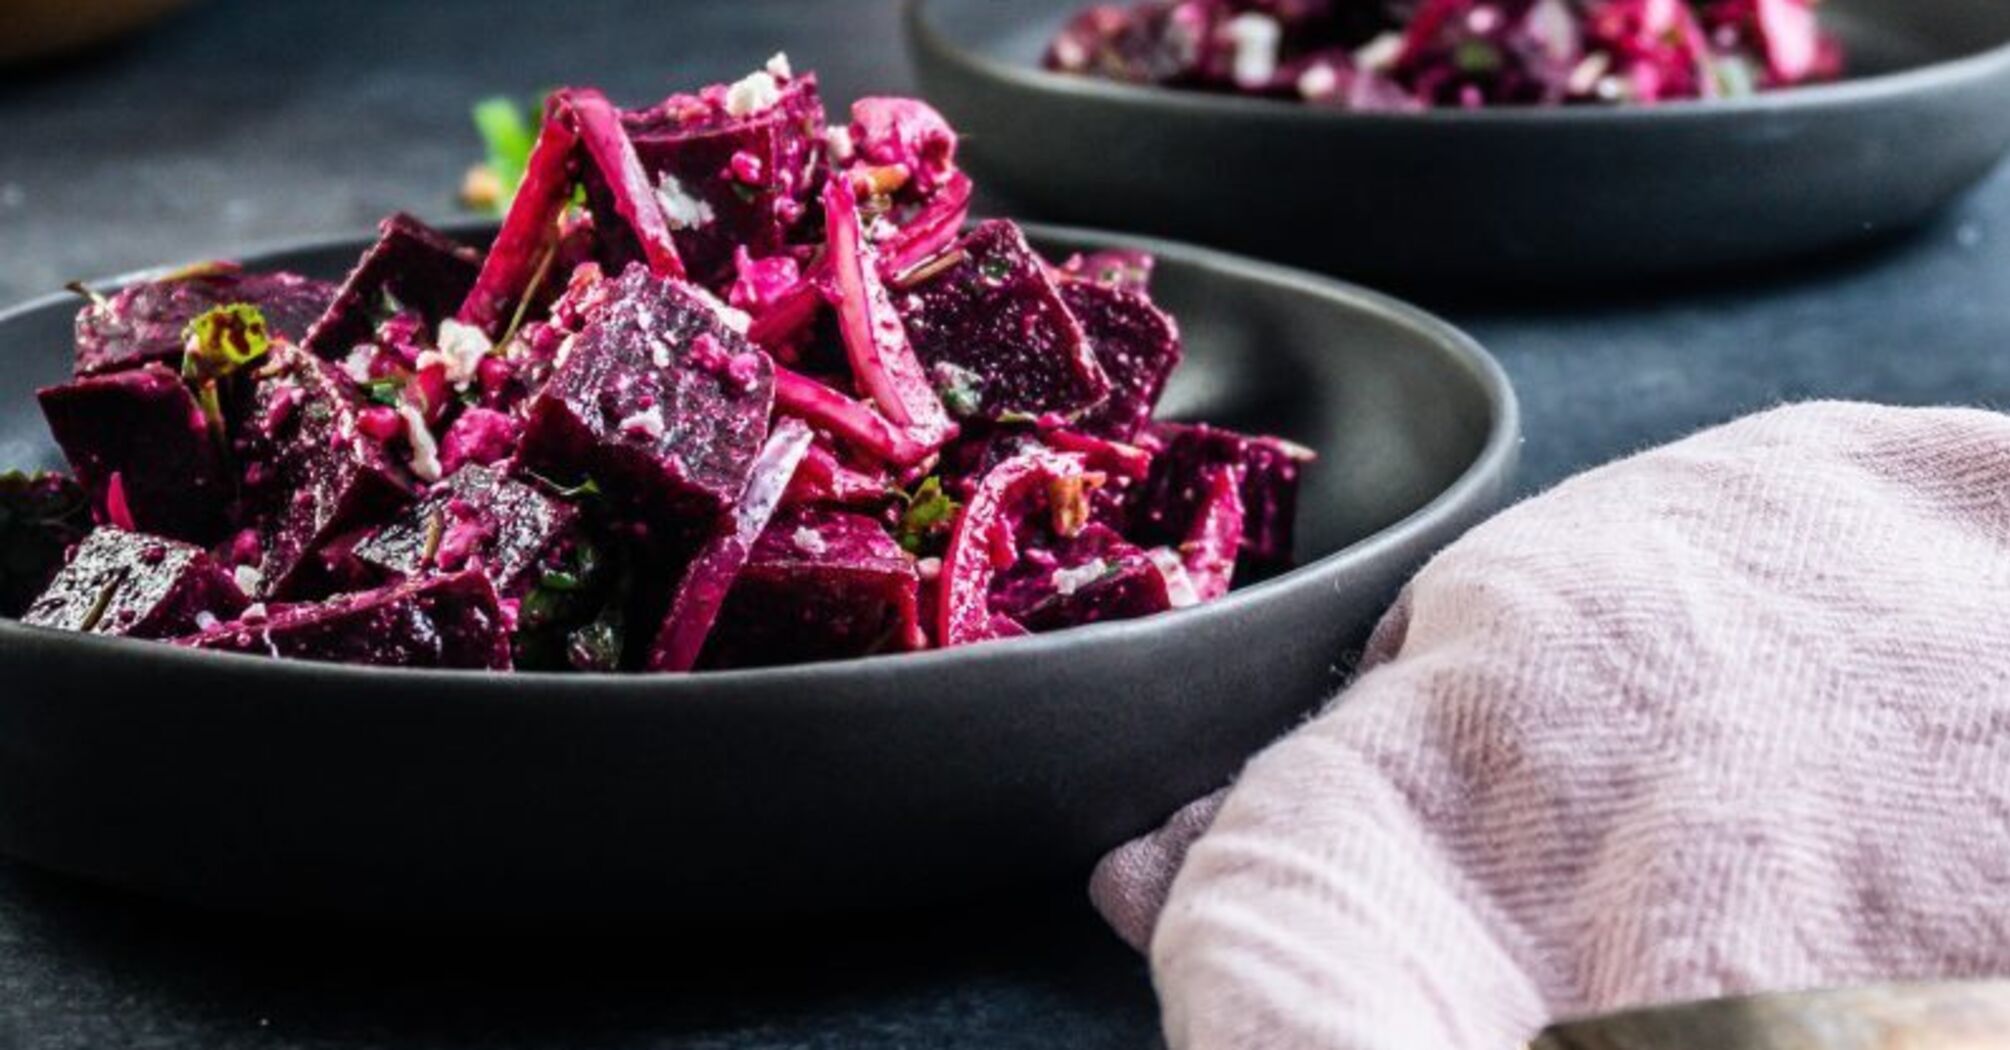 Recipes for beetroot salads